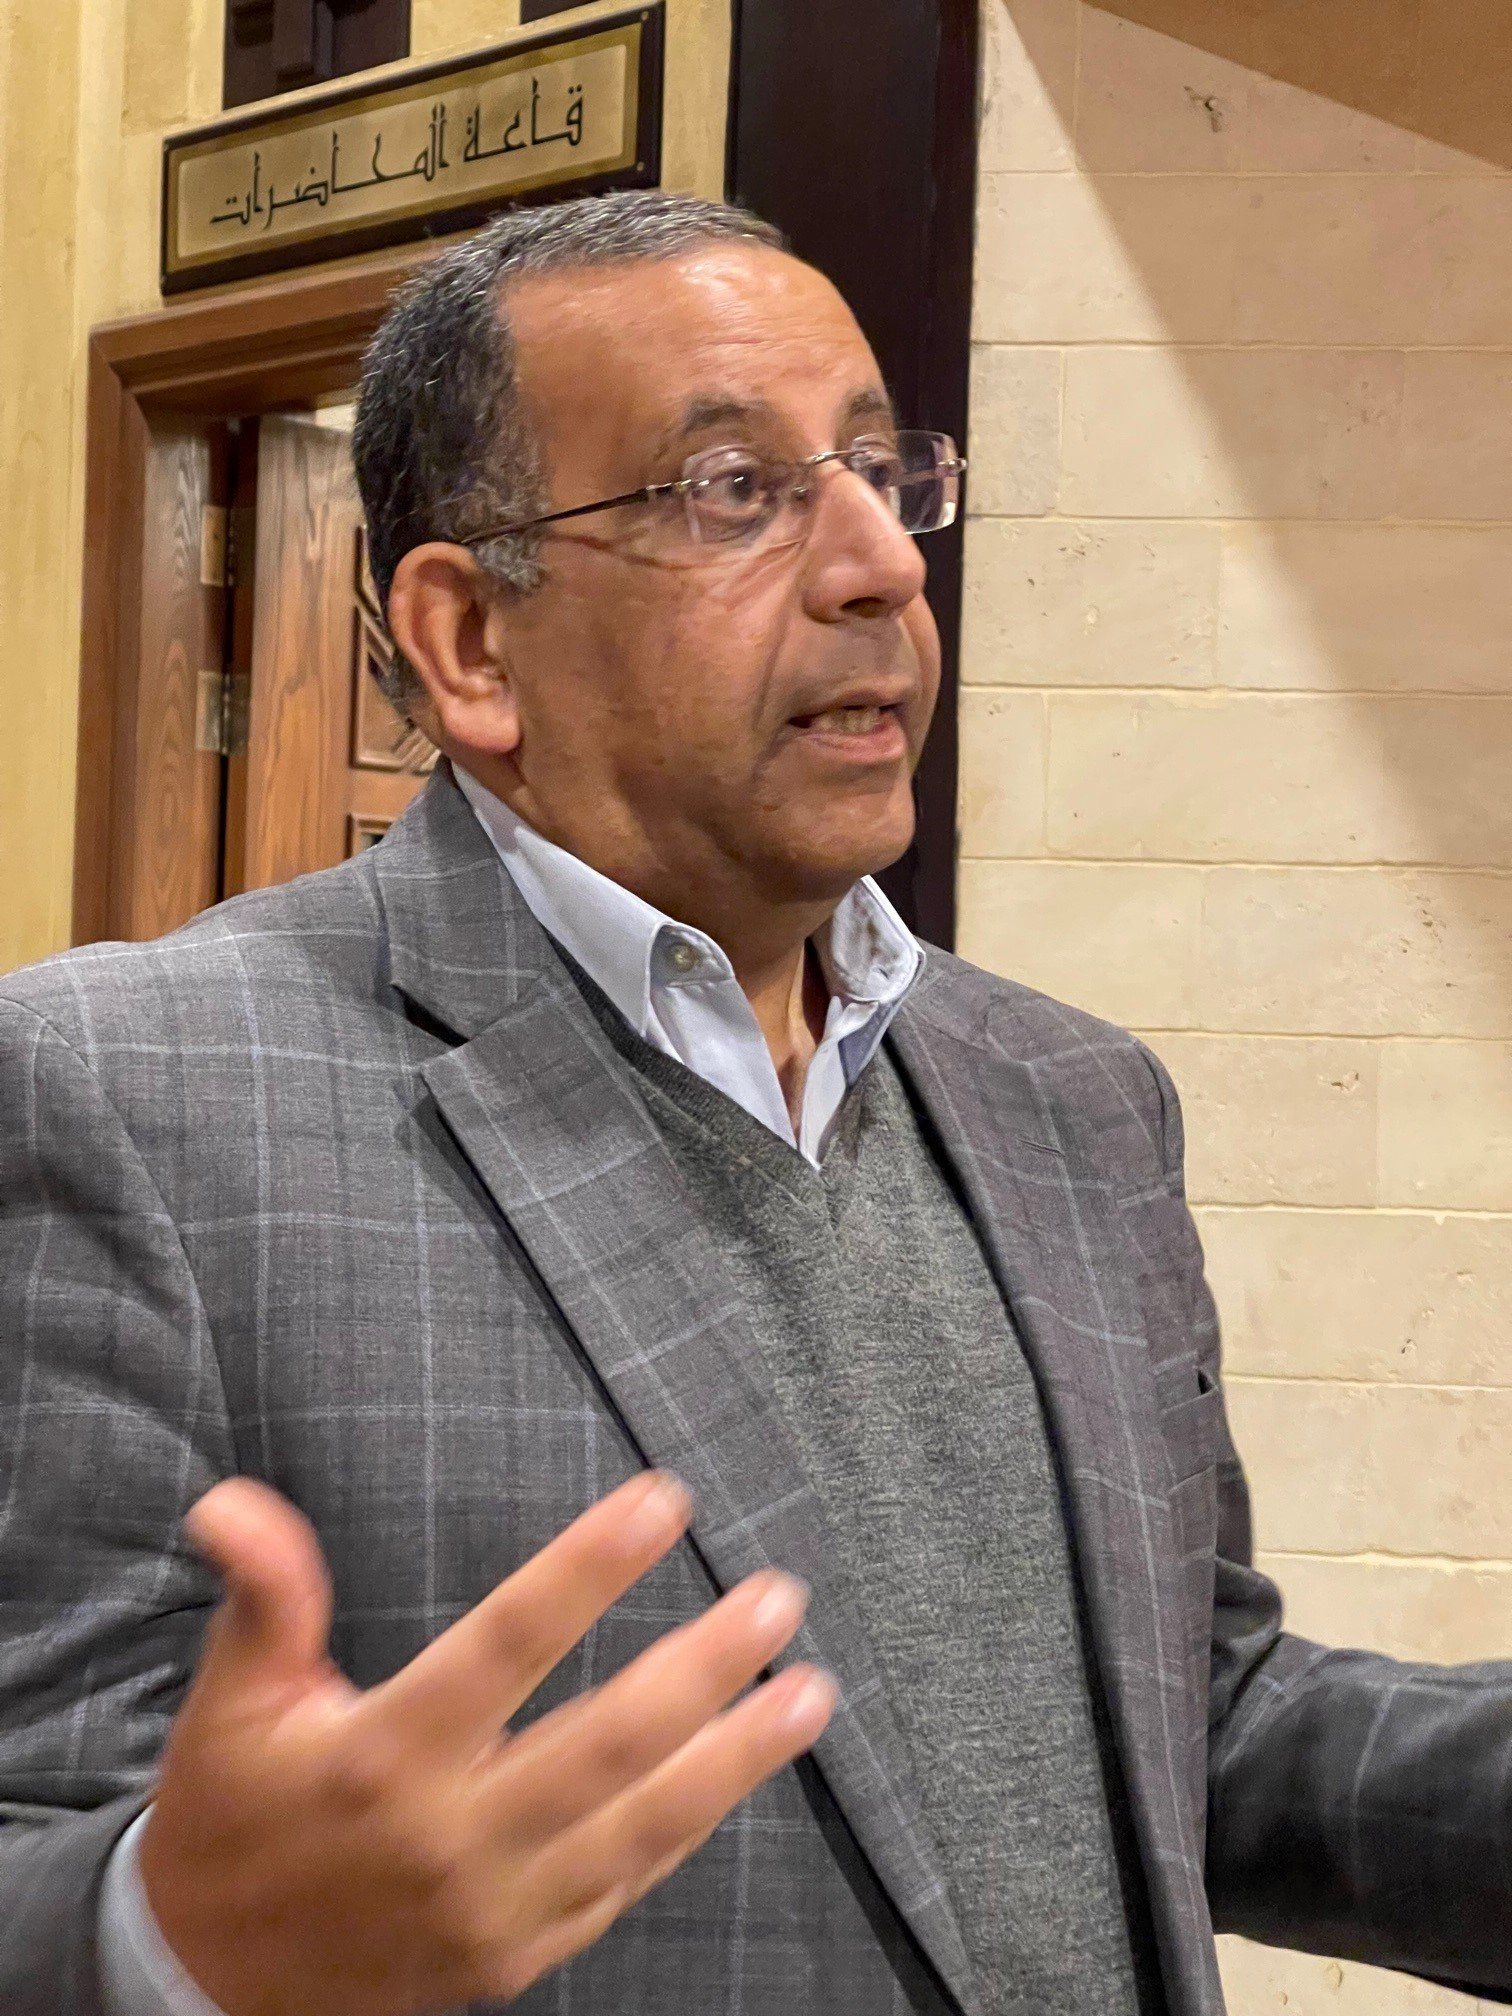 Beloved former President Atef Gendy remains at ETSC to teach New Testament, and oversee the Center for Middle Eastern Christianity, a vision of Dr. Ken Bailey, legendary missionary